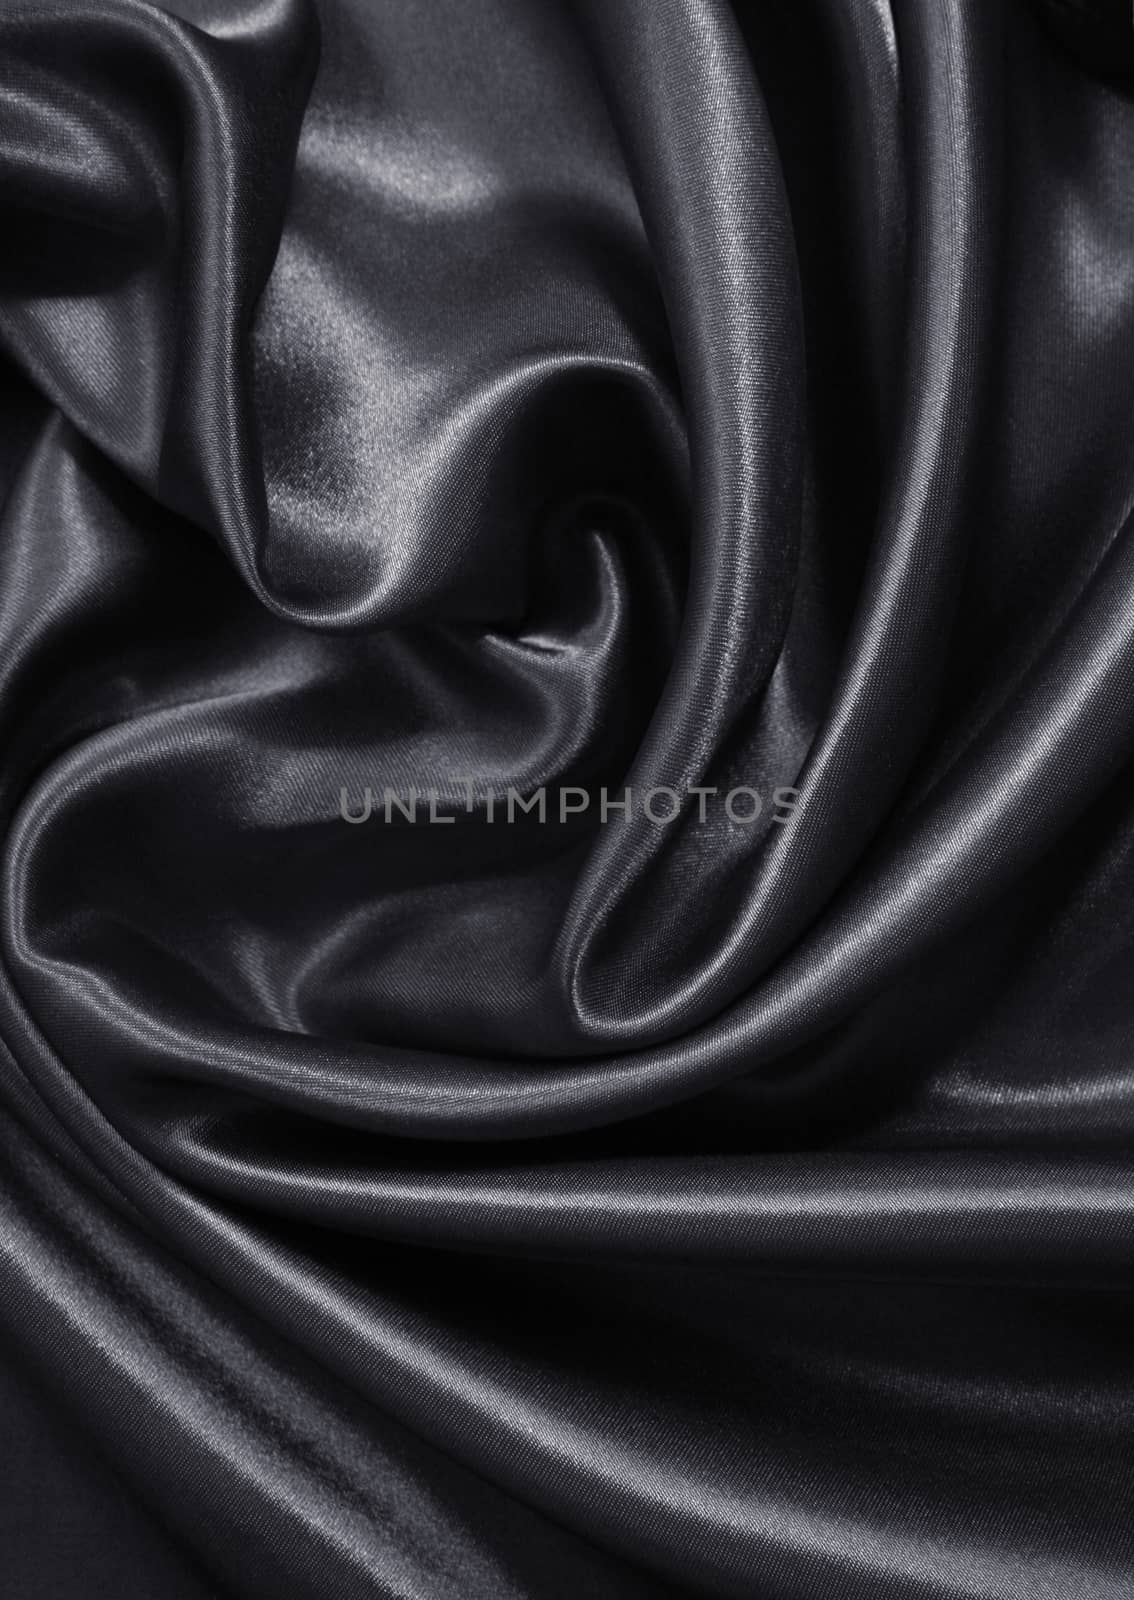 Smooth elegant grey silk or satin can use as background  by oxanatravel